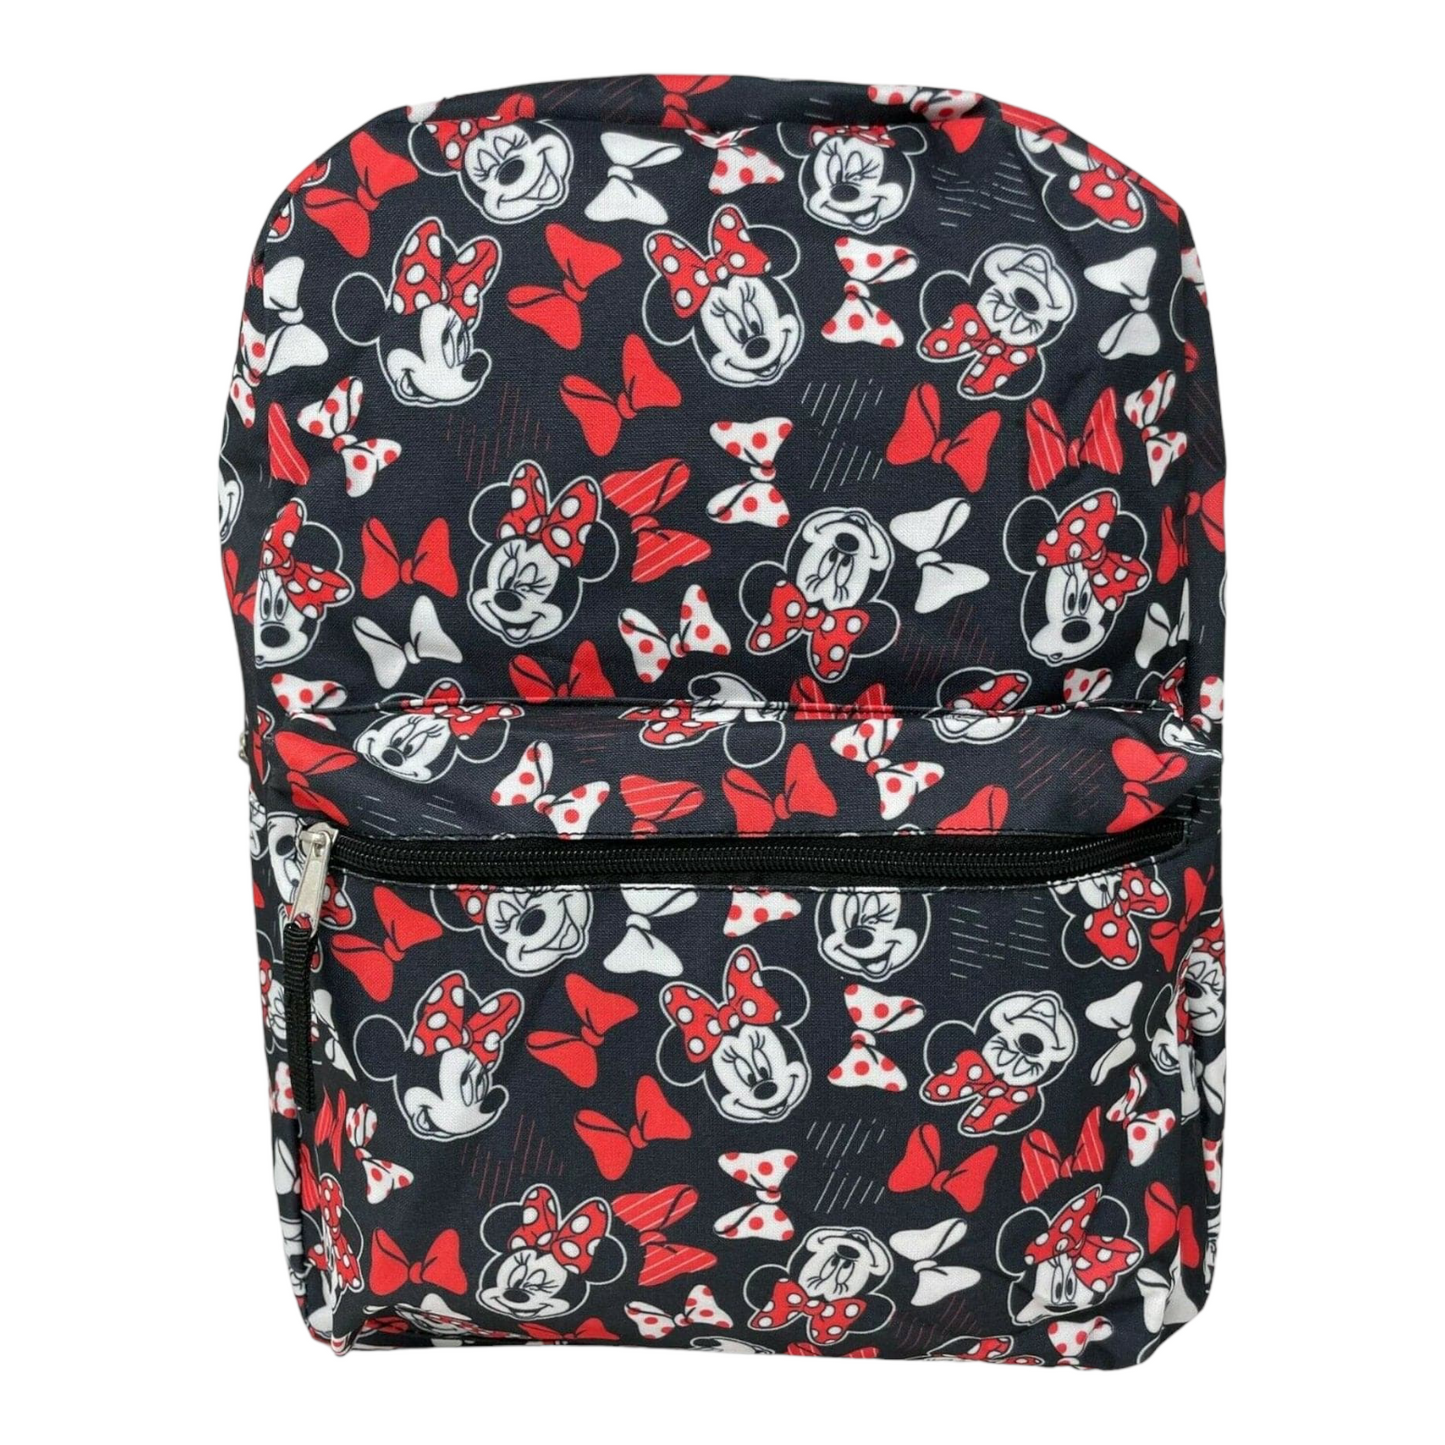 Minnie Bow 16" Backpack with All Over Print